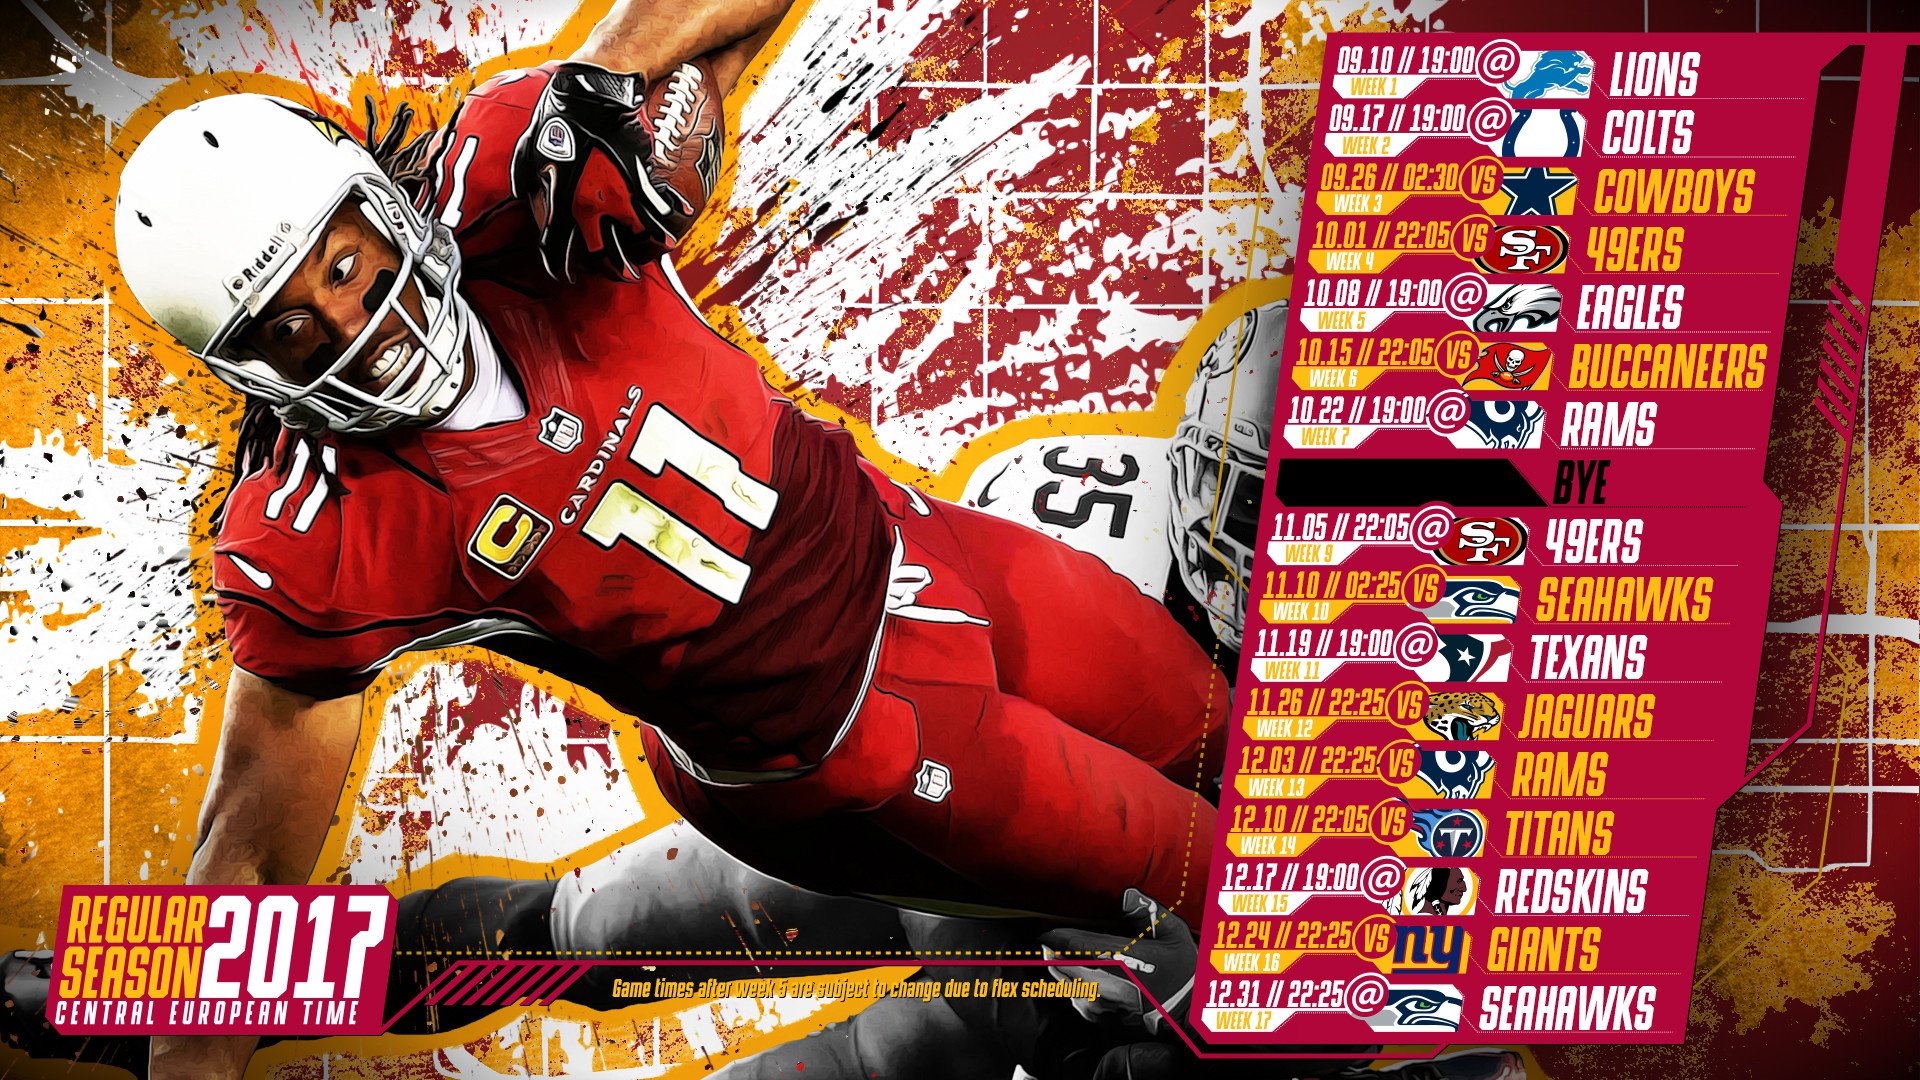 1920x1080 Schedule wallpaper for the Arizona Cardinals Regular Season, 2017 Central  European Time. Made by